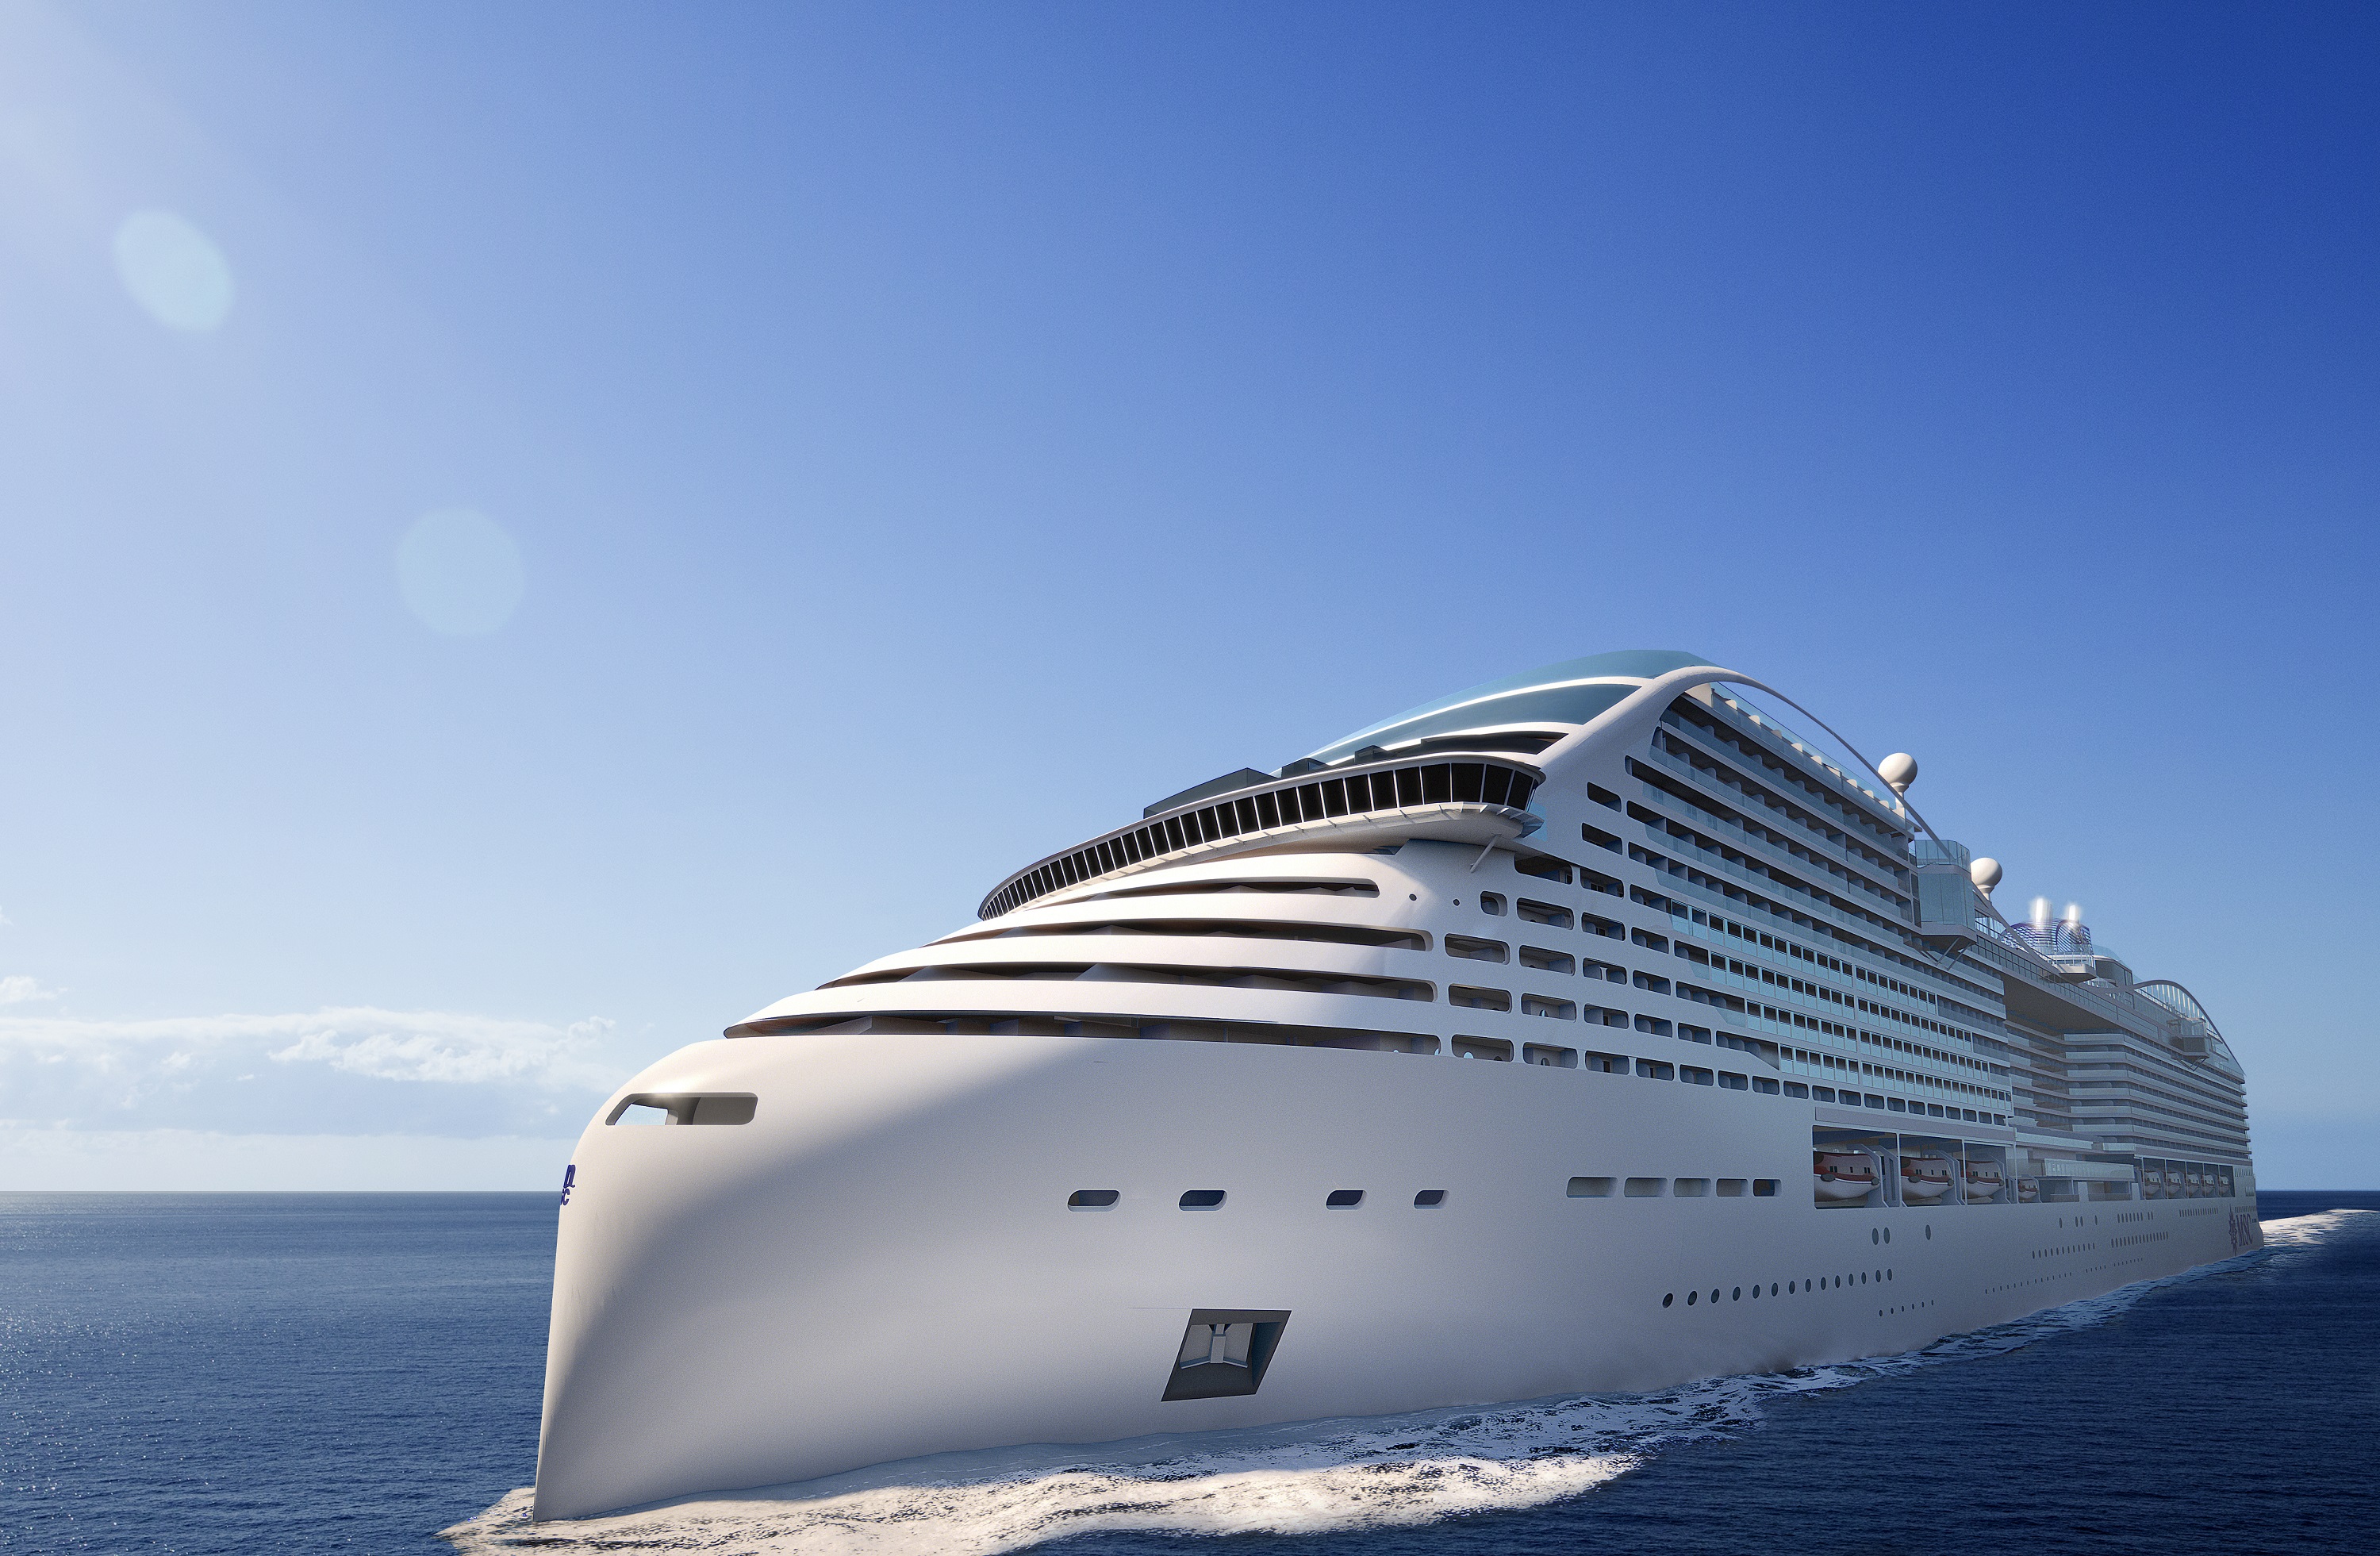 msc-cruises-world-class-ships-will-be-powered-by-lng.jpg